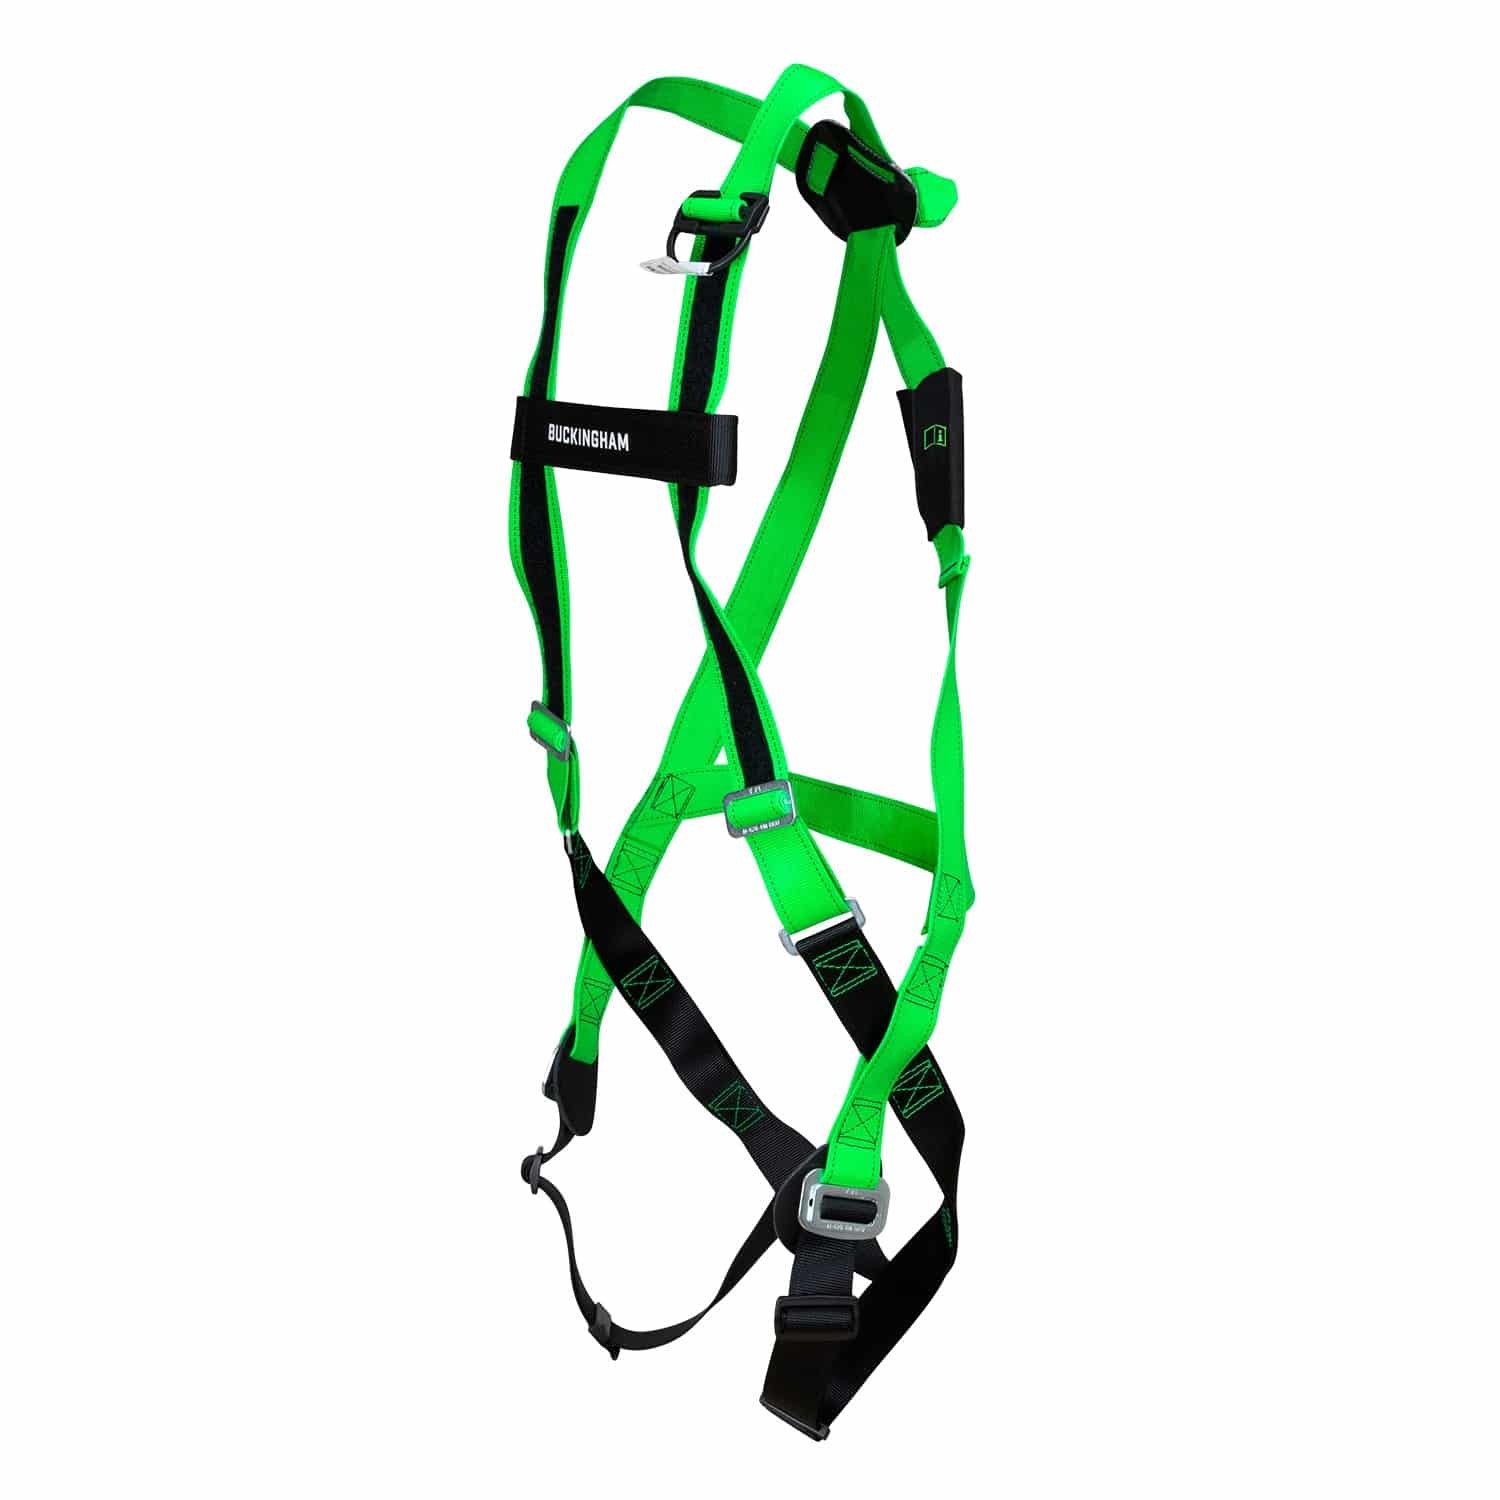 Buckingham H Style Full Body Harness from Columbia Safety